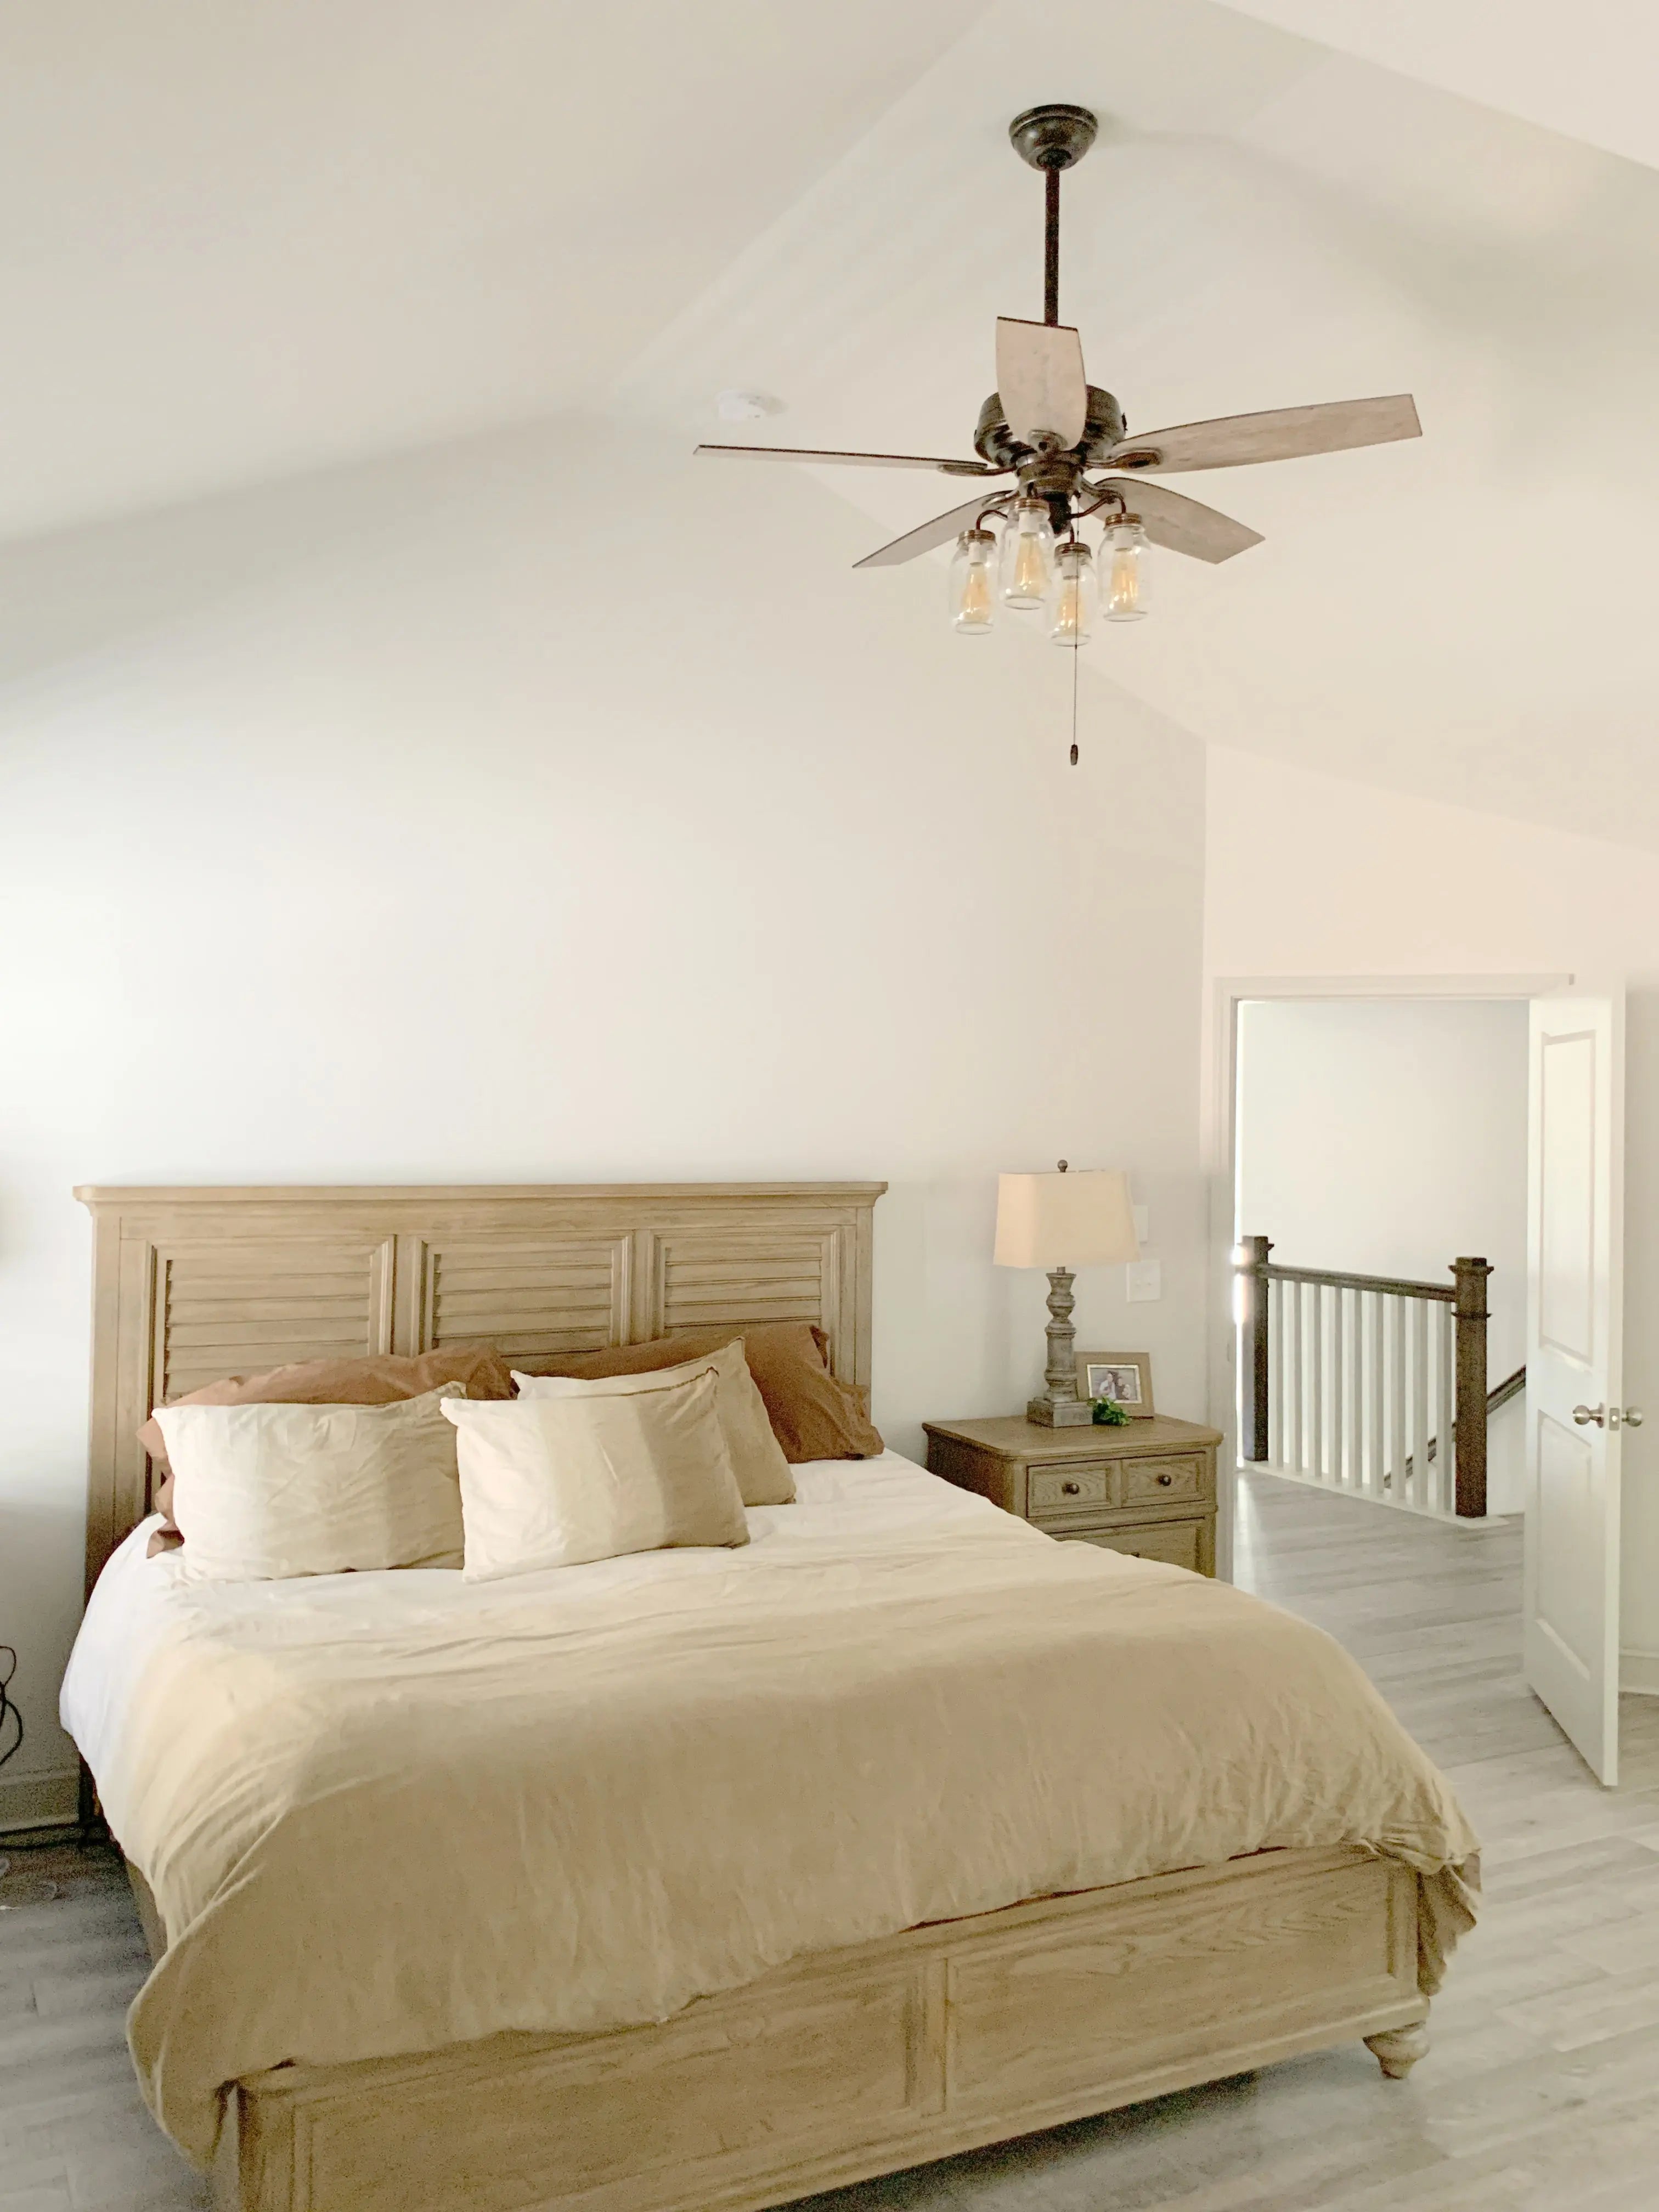 How To Upgrade A Ceiling Fan The Lamp